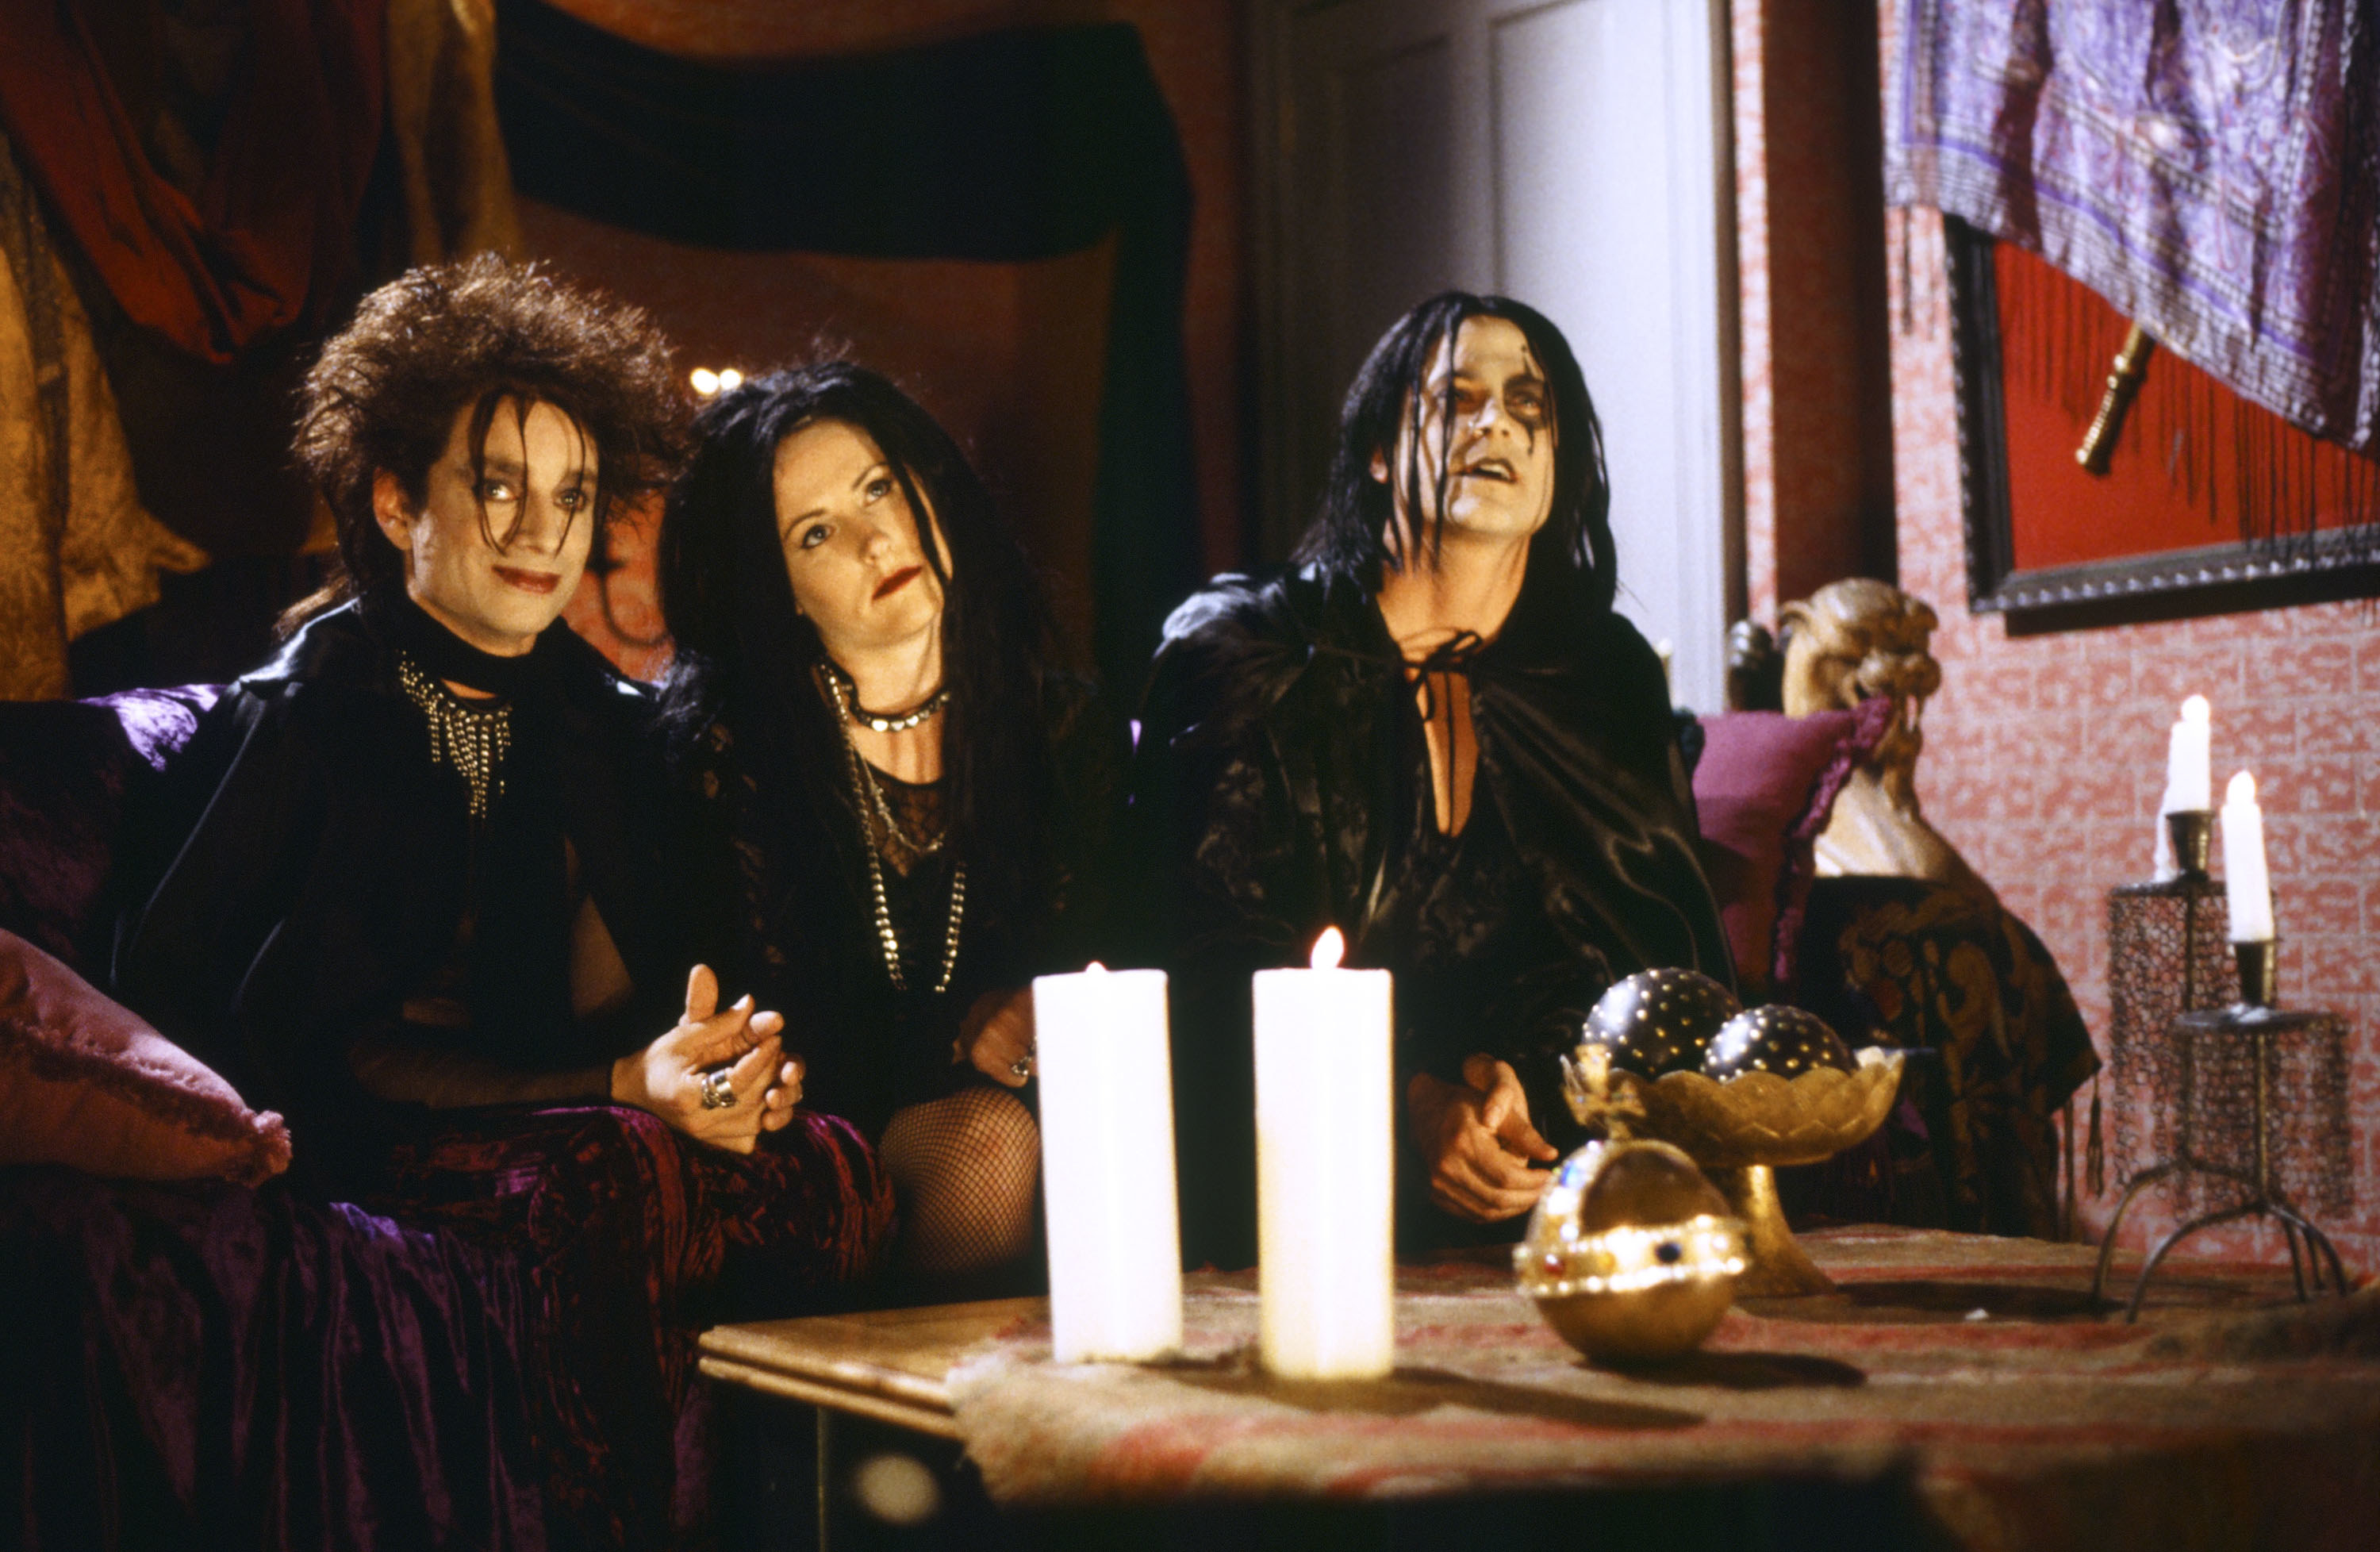 Chris Kattan as Azrael Abyss, Molly Shannon as Circe Nightshade, Rob Lowe as The Beholder during the &#x27;Goth Talk&#x27; skit